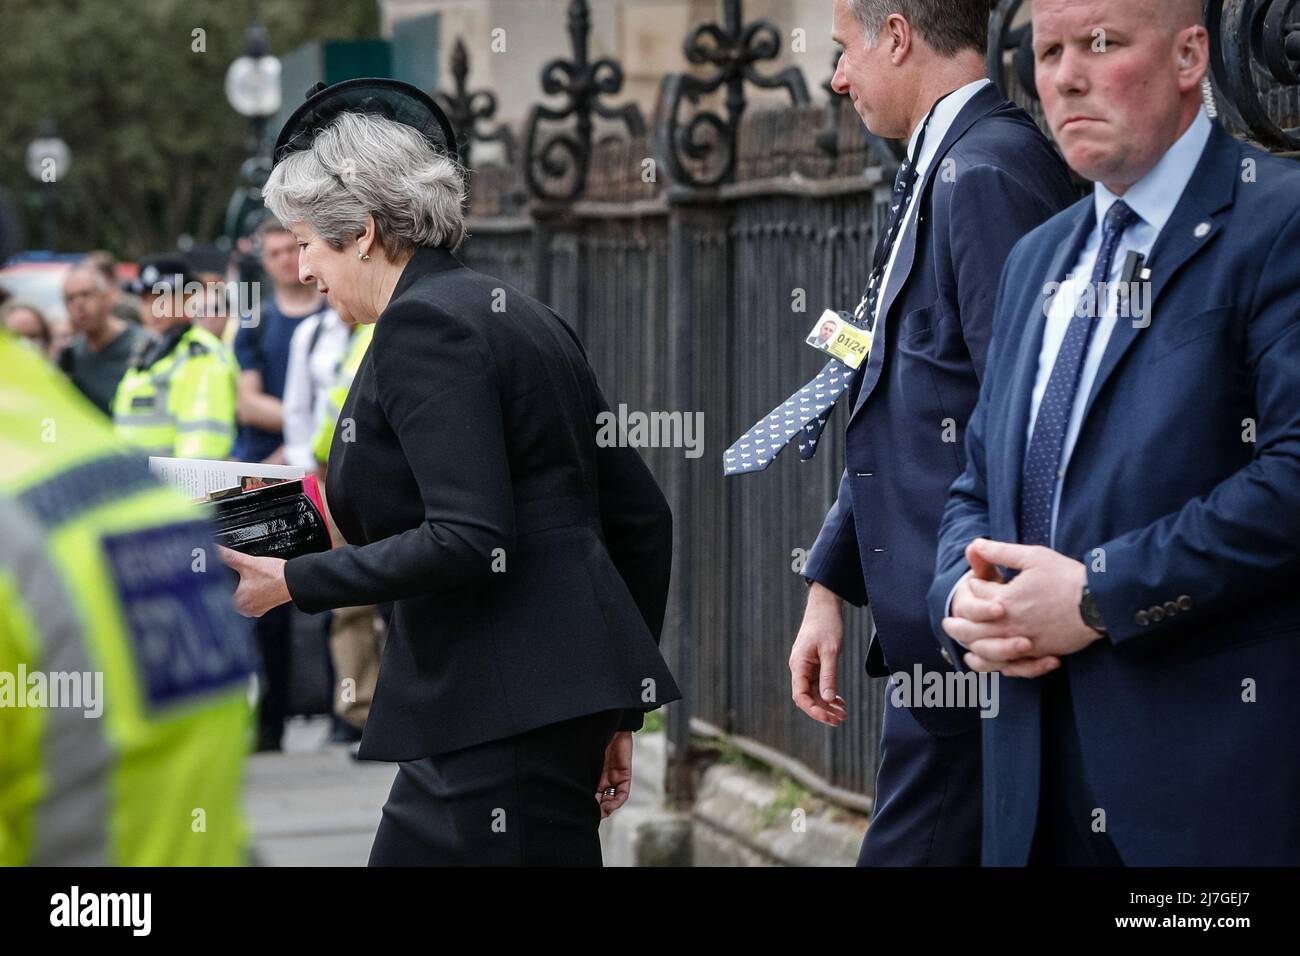 London, UK. 9th May, 2022. Theresa May, former Prime Minister. The memorial service for MP James Brokenshire, who died aged 53 last year, is held at St Margaret 's Church in the grounds of Westminster Abbey today. The service is attended by Prime Minister Boris Johnson, former Prime Ministers David Cameron and Theresa May, cabinet ministers, MPs and other guests. Credit: Imageplotter/Alamy Live News Stock Photo